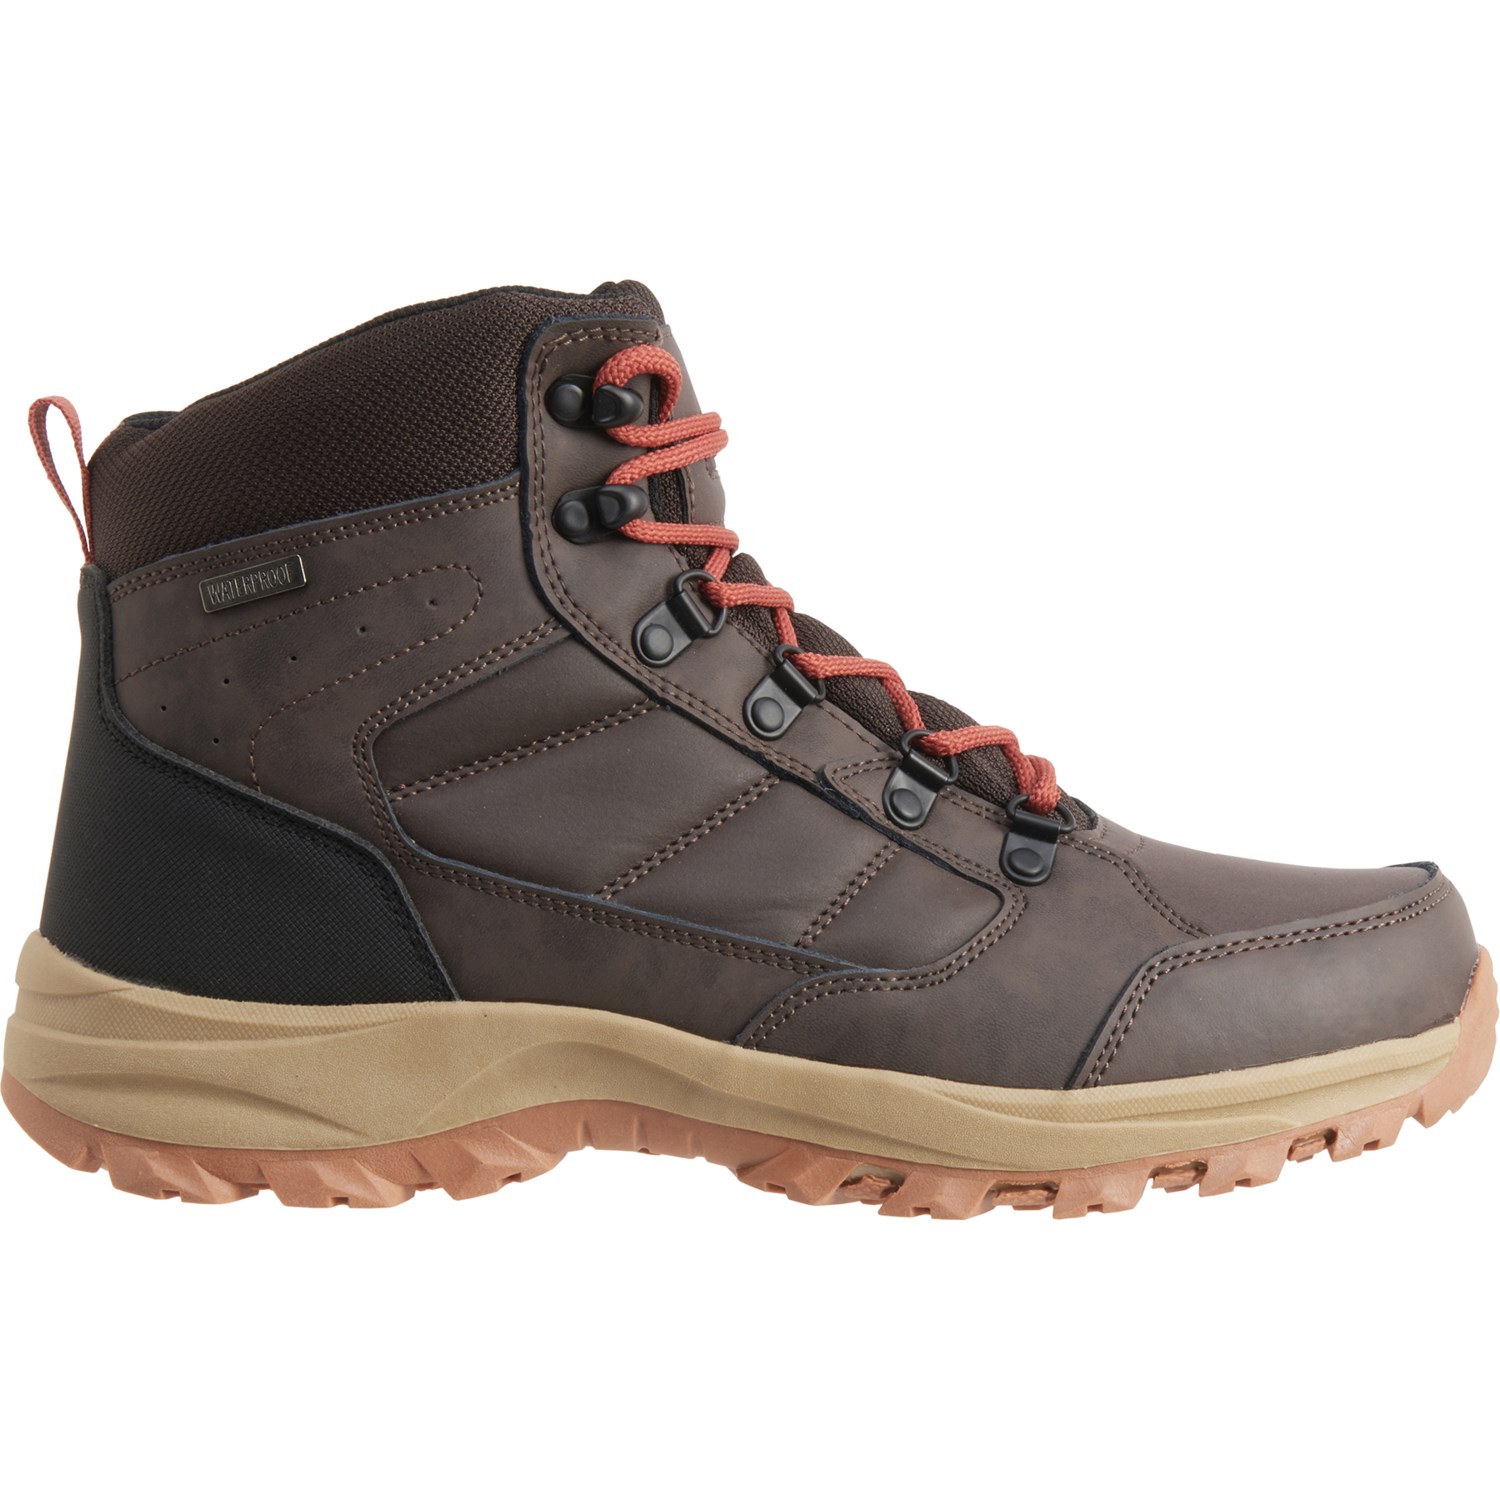 High Sierra Willow Hiking Boots (For Men) - Save 28%